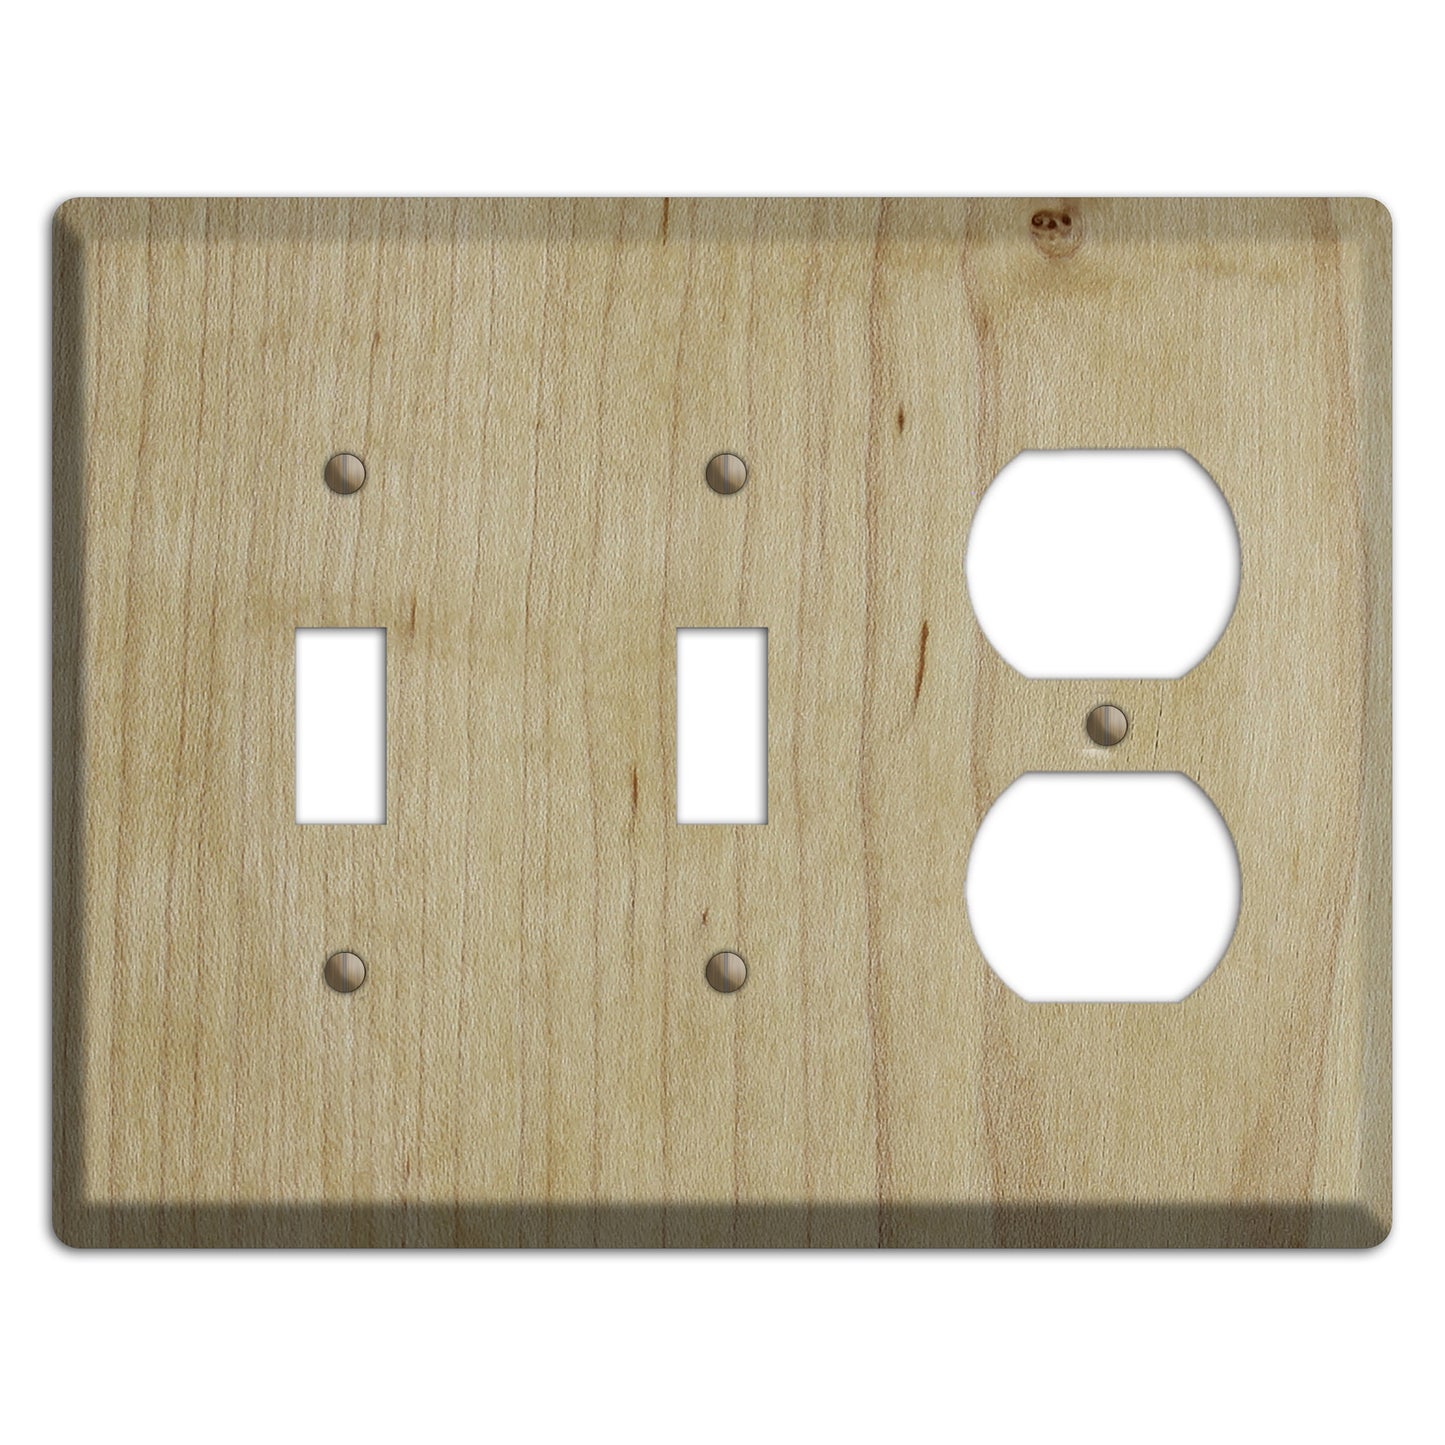 Unfinished Maple Wood 2 Toggle / Duplex Outlet Cover Plate